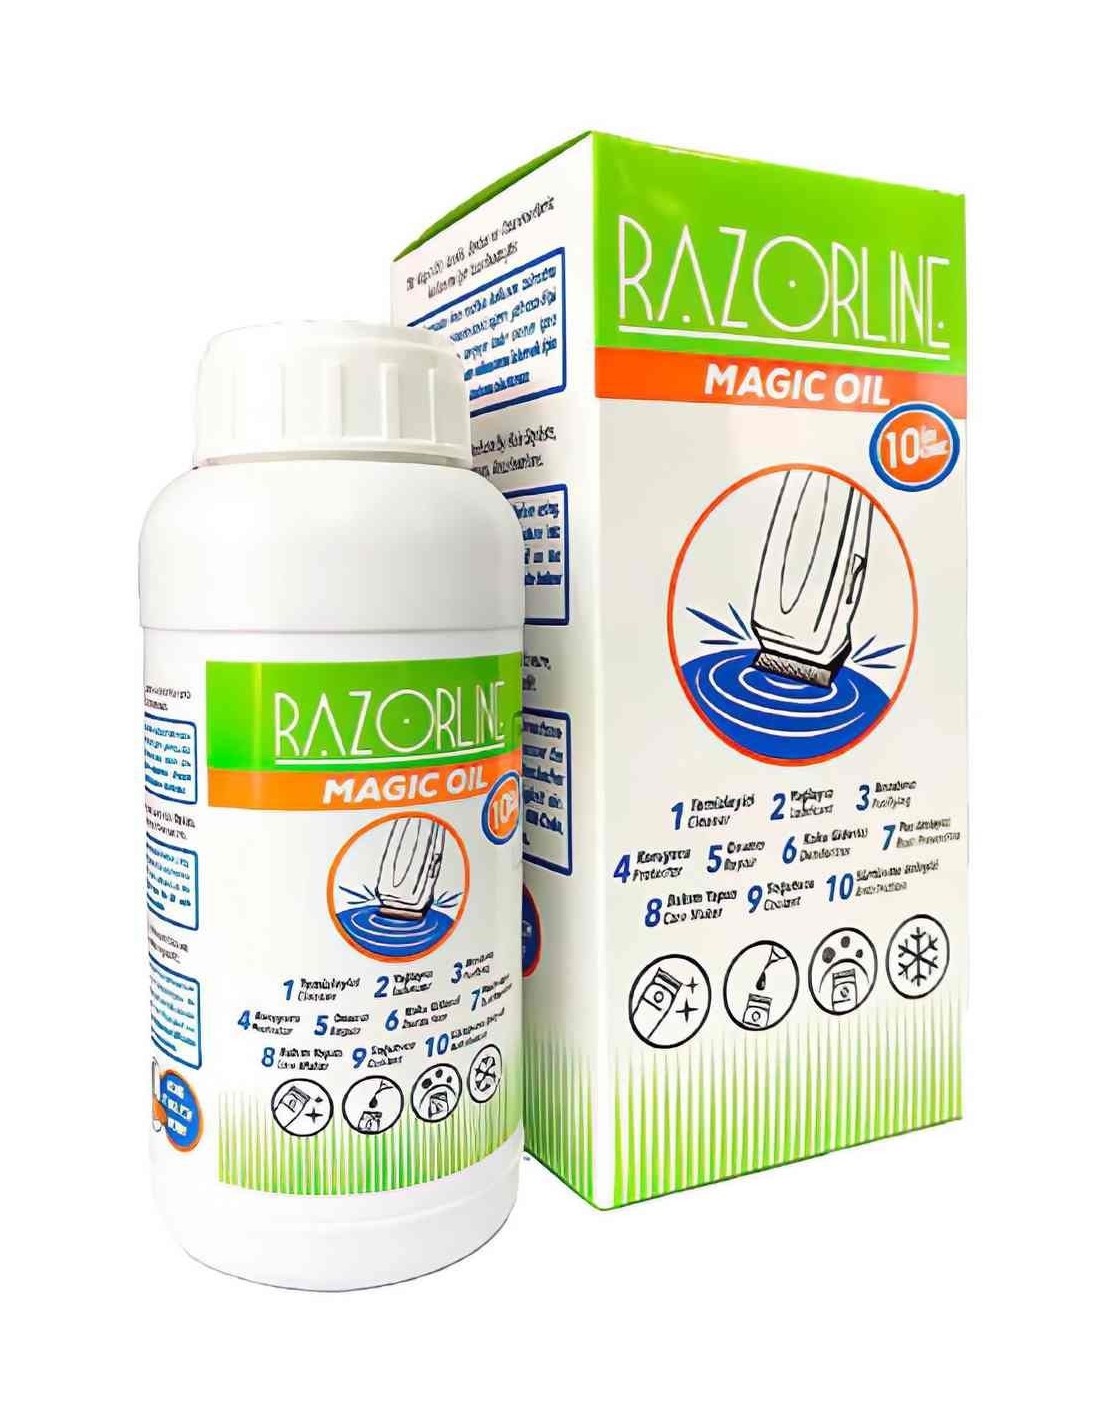 Razorline Magic Oil For Hair Clippers/Trimmers 200ml 